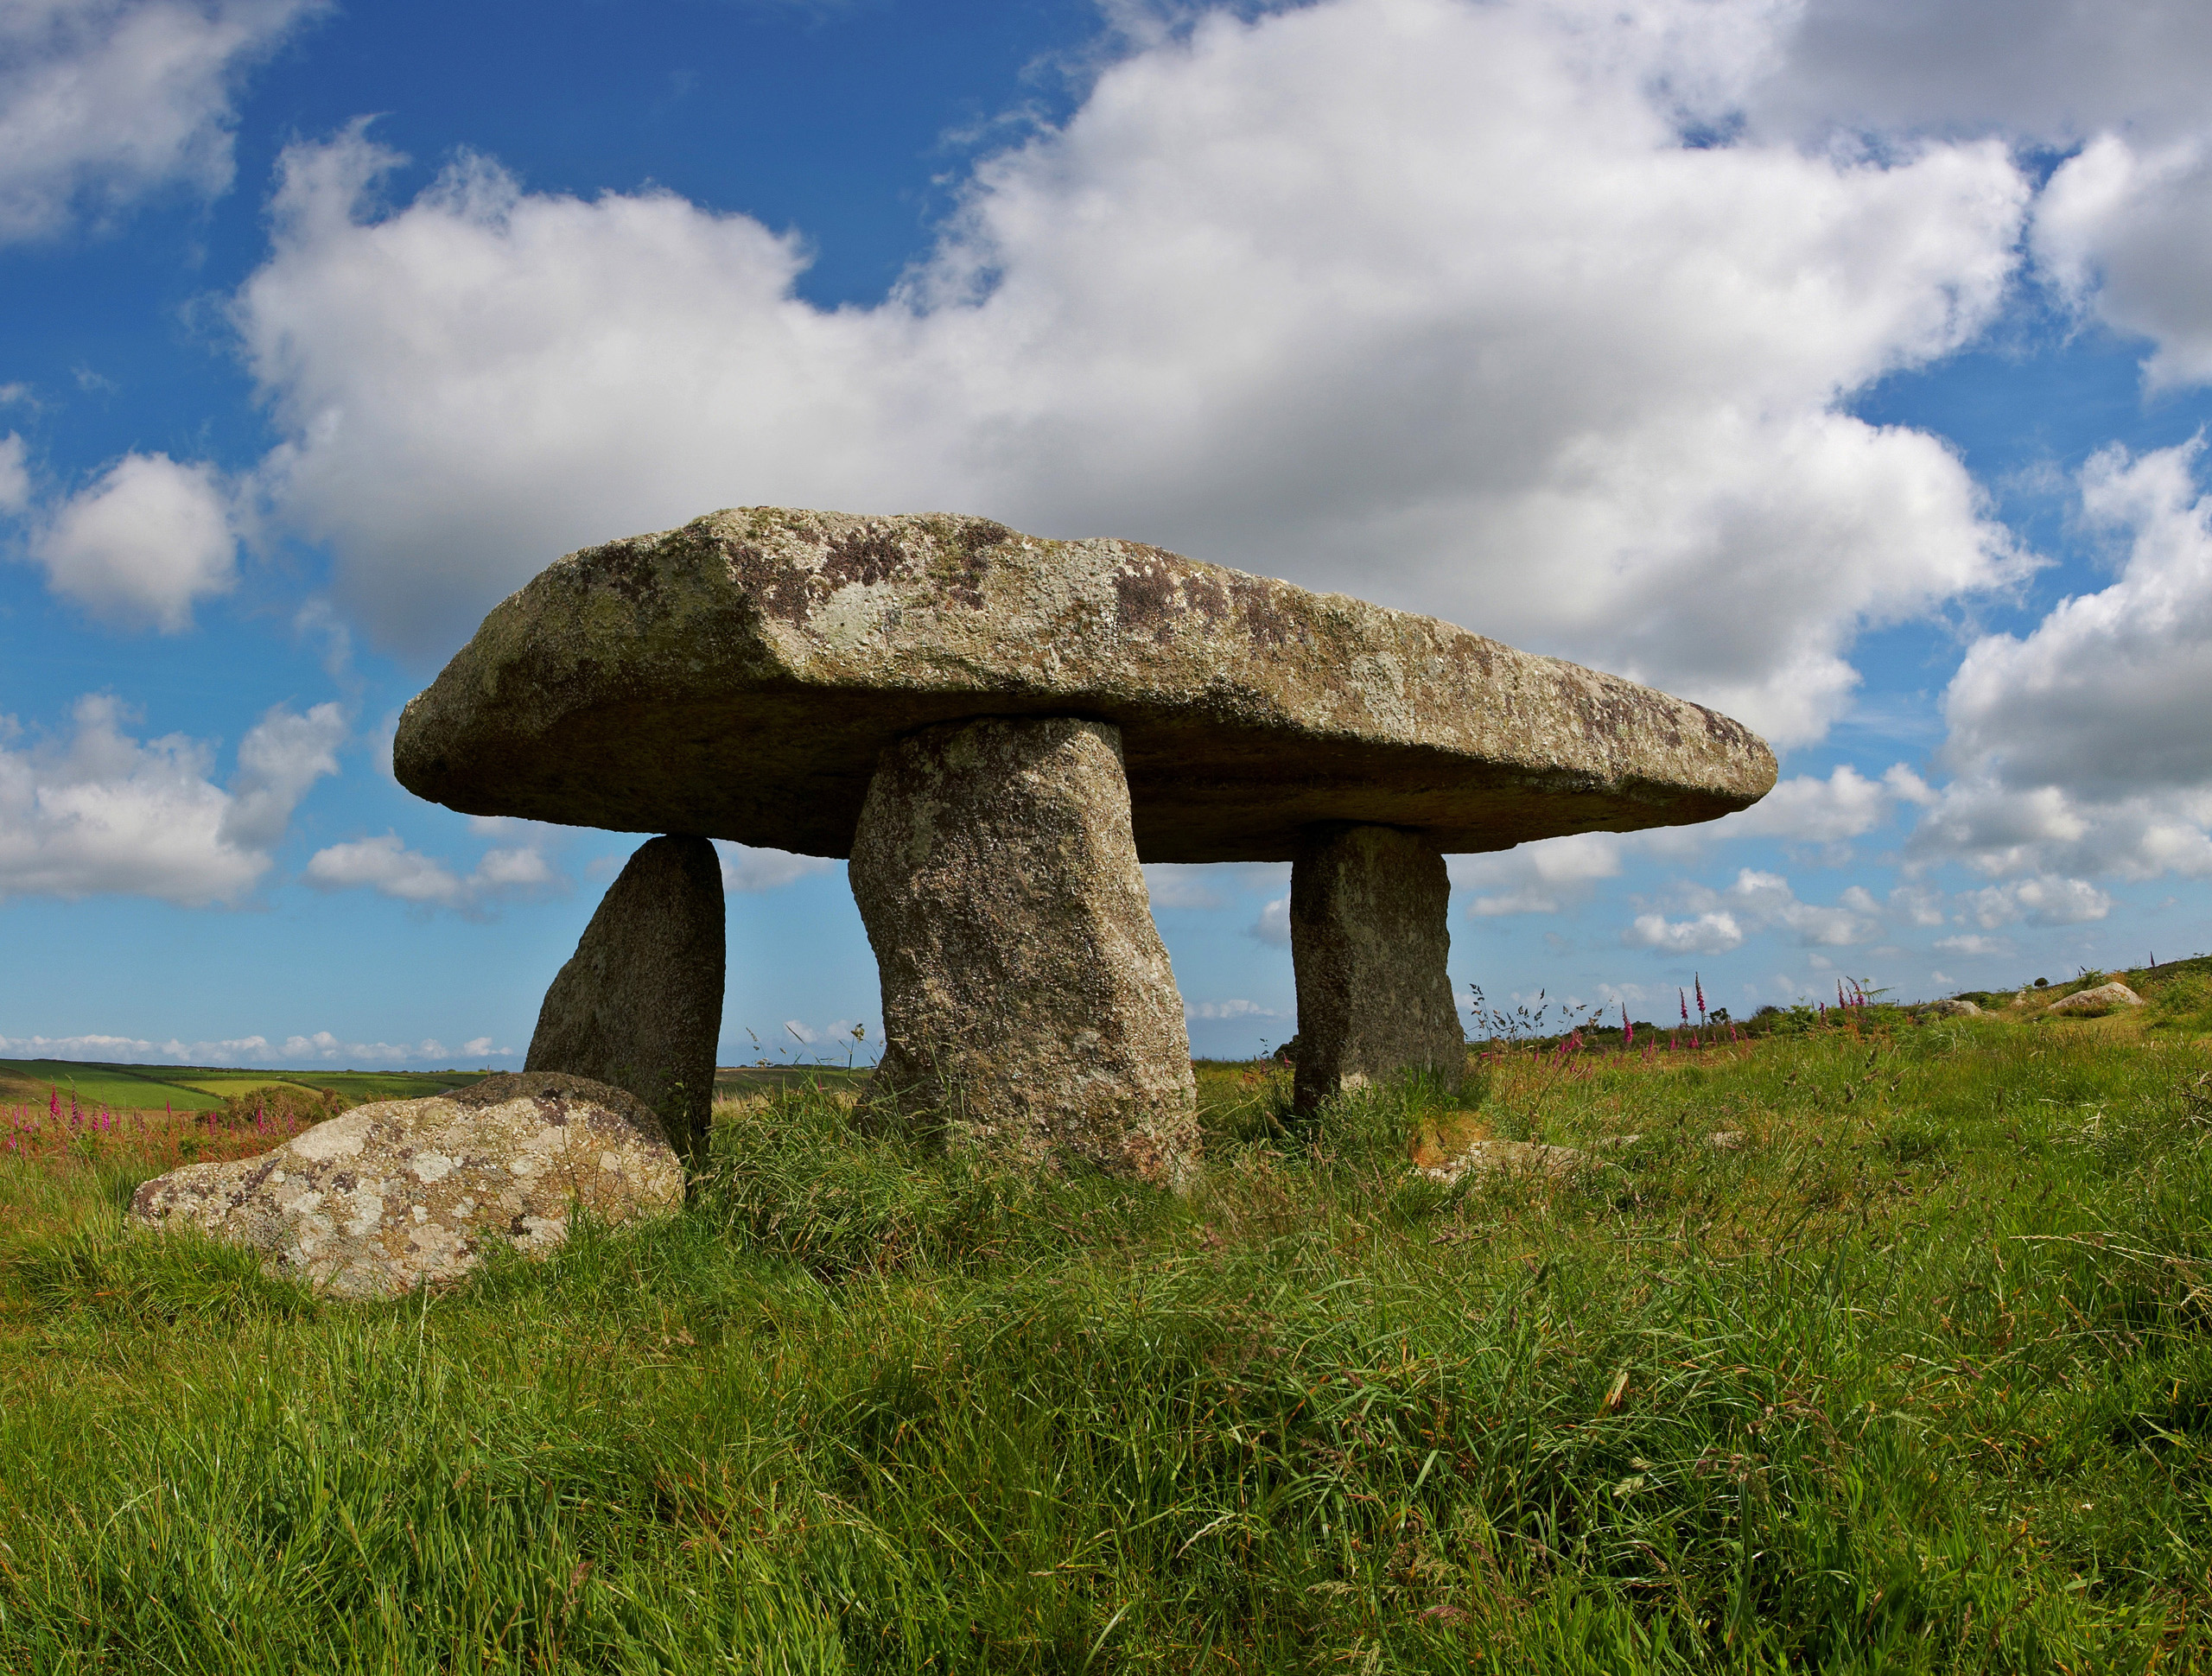 http://www.runic.com/gallery/albums/ancient-places/lanyon-quoit-pano-6.jpg